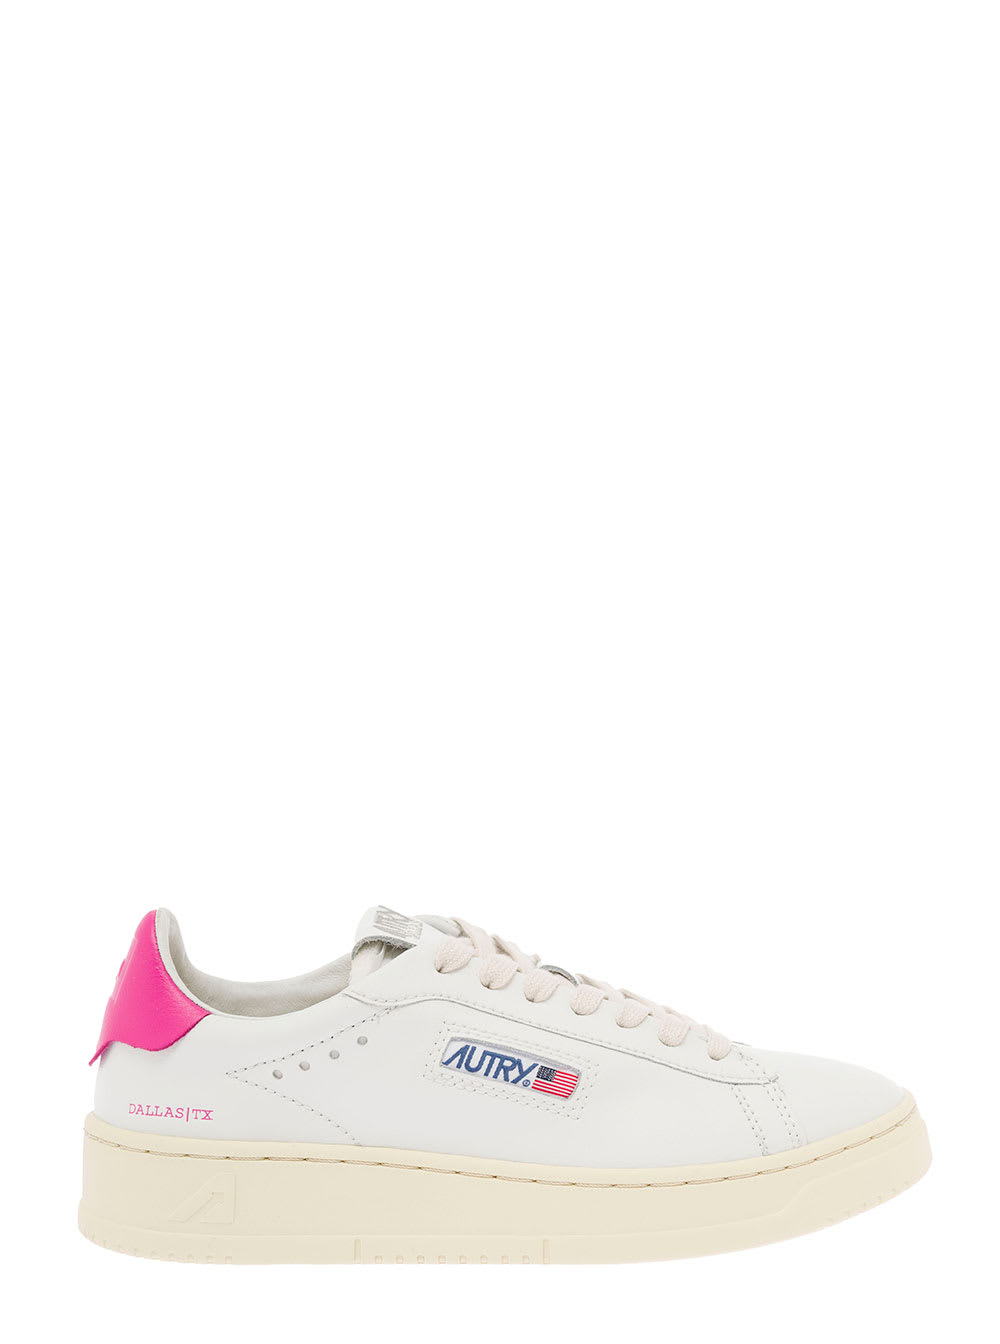 Autry Womans Dallas White And Pink Leather Sneakers